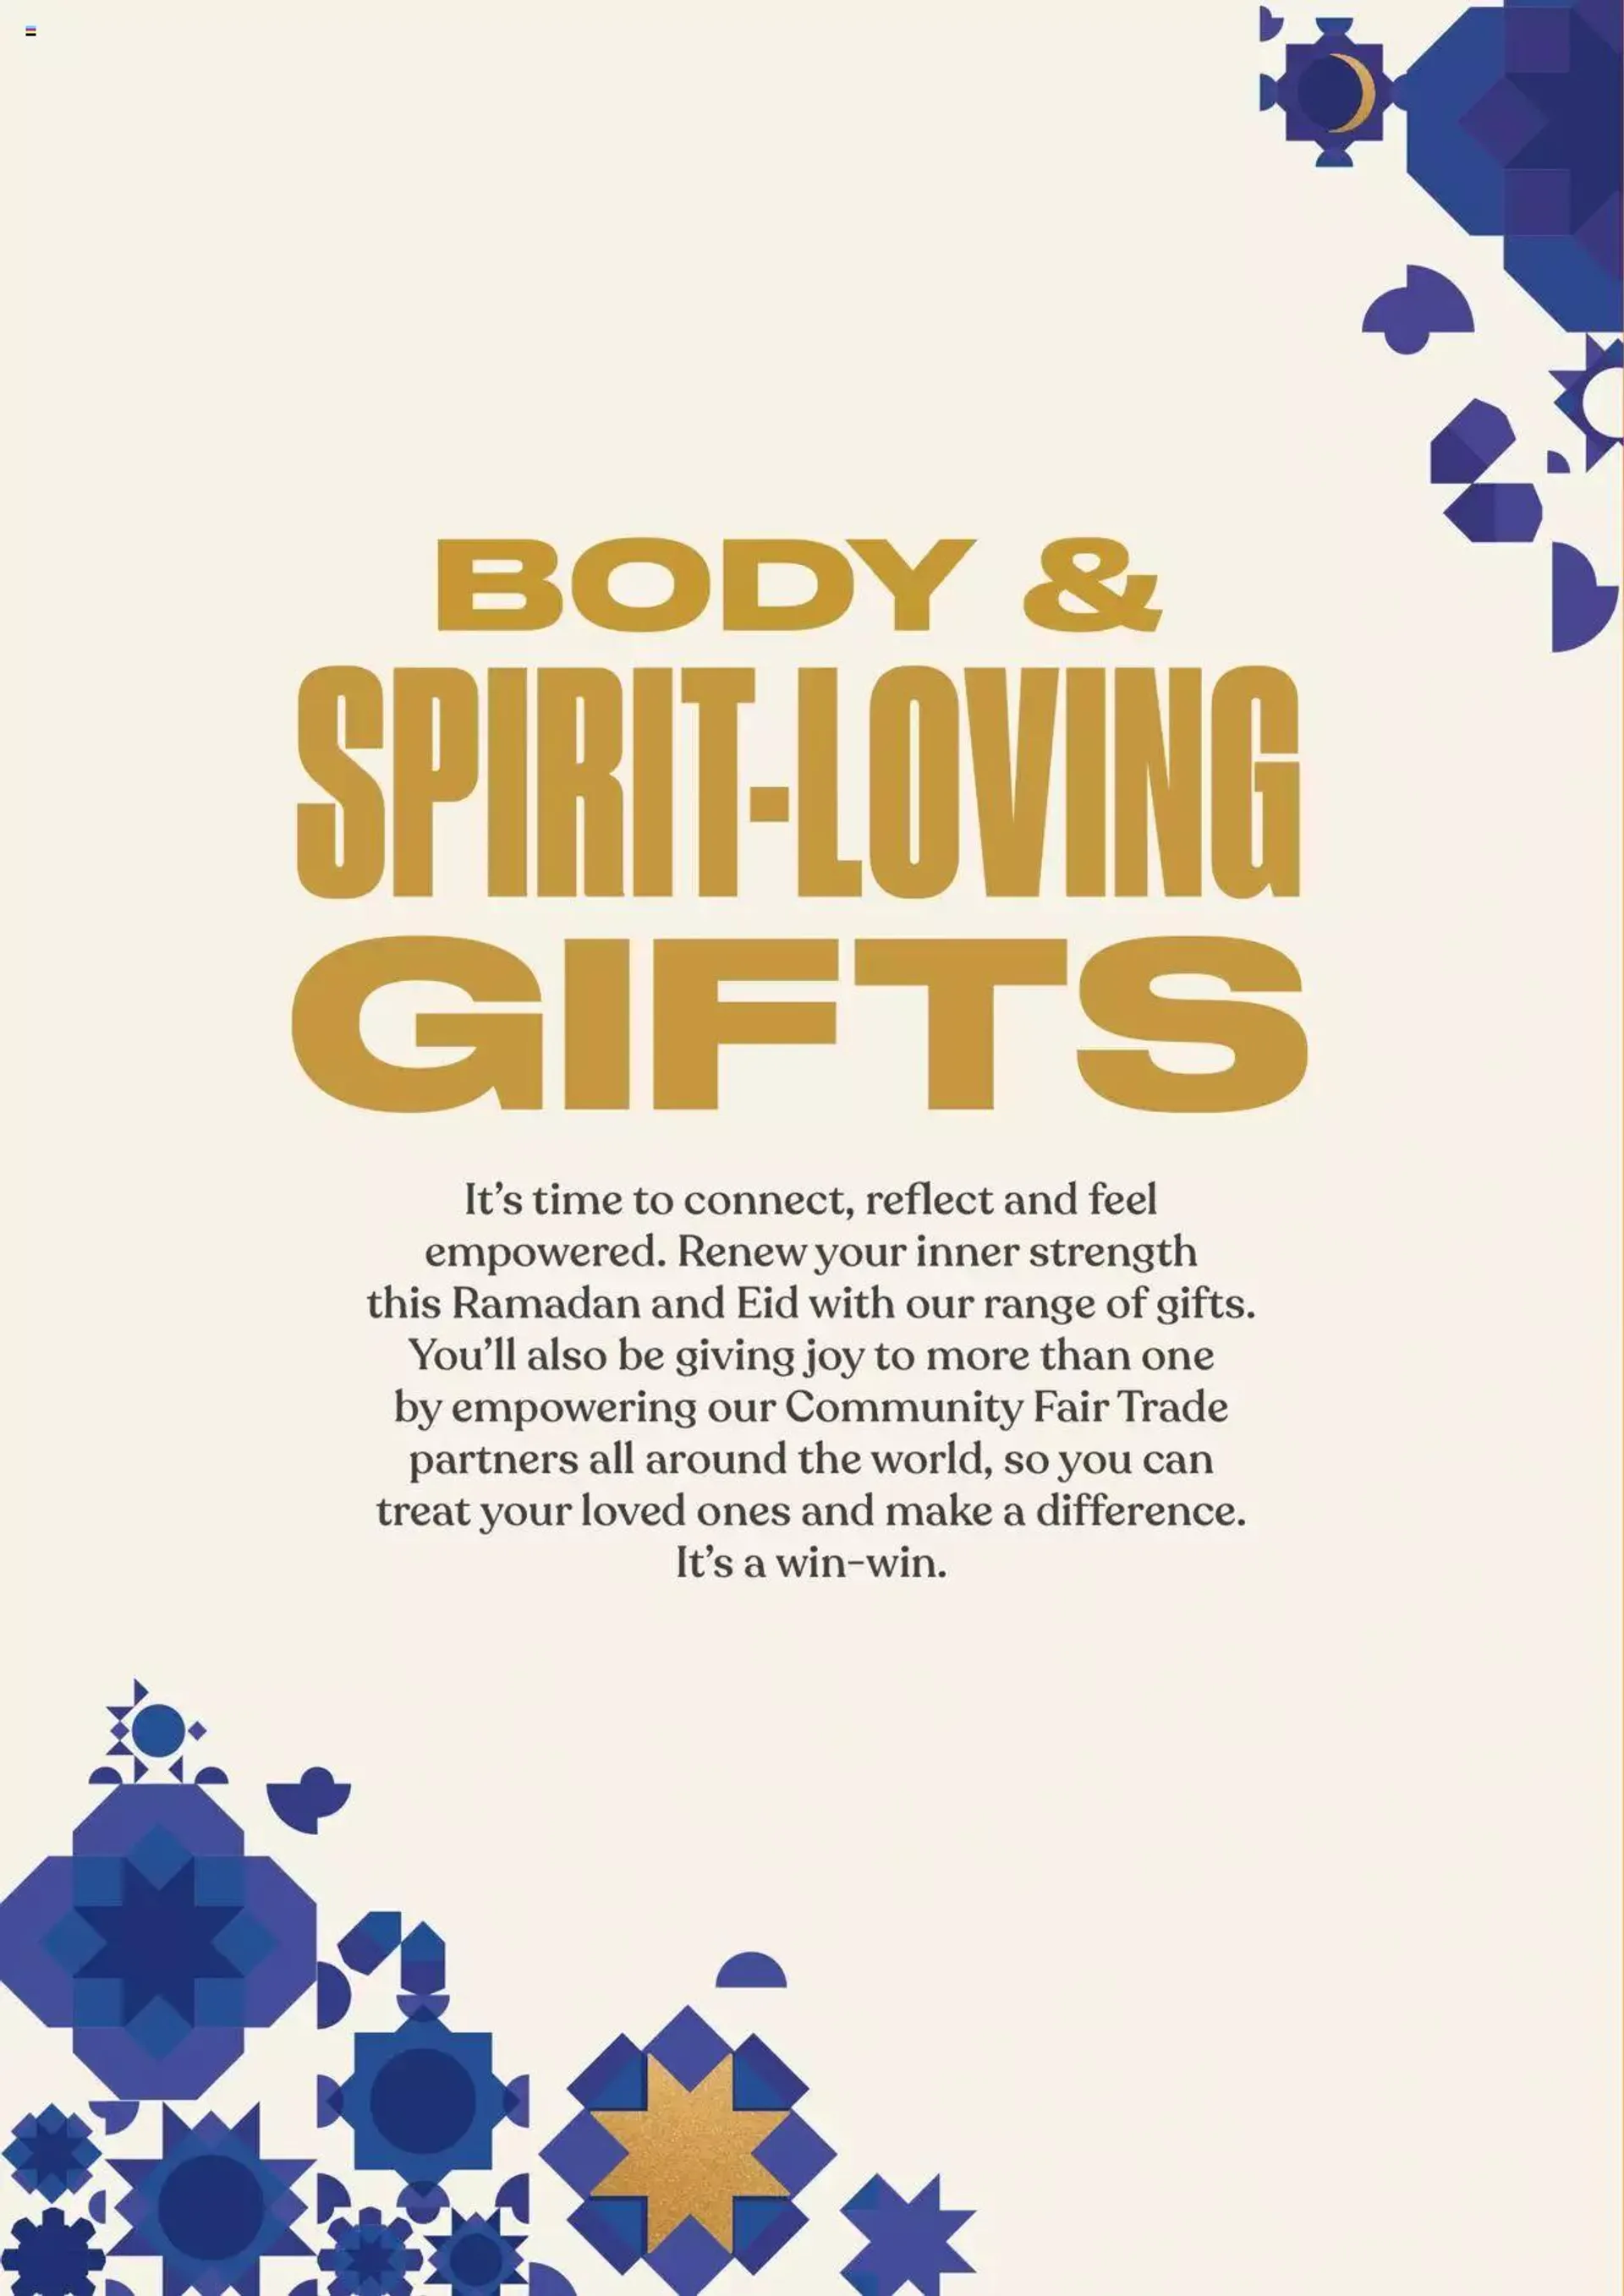 The Body Shop Lift Their Spirits Gift Guide - 1